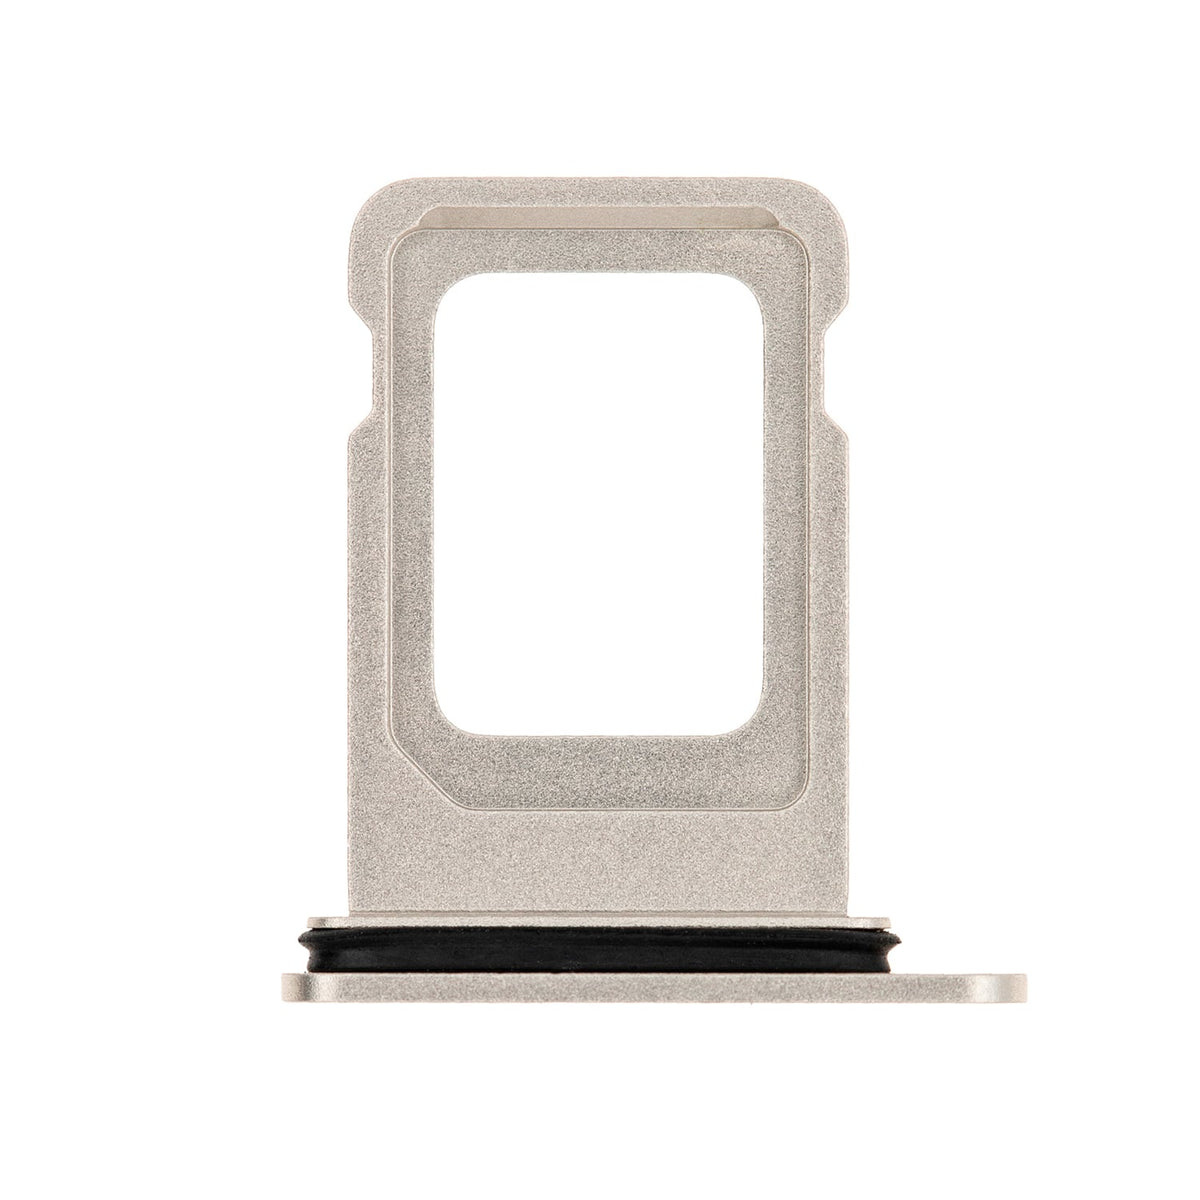 SINGLE SIM CARD TRAY FOR IPHONE 12 - WHITE